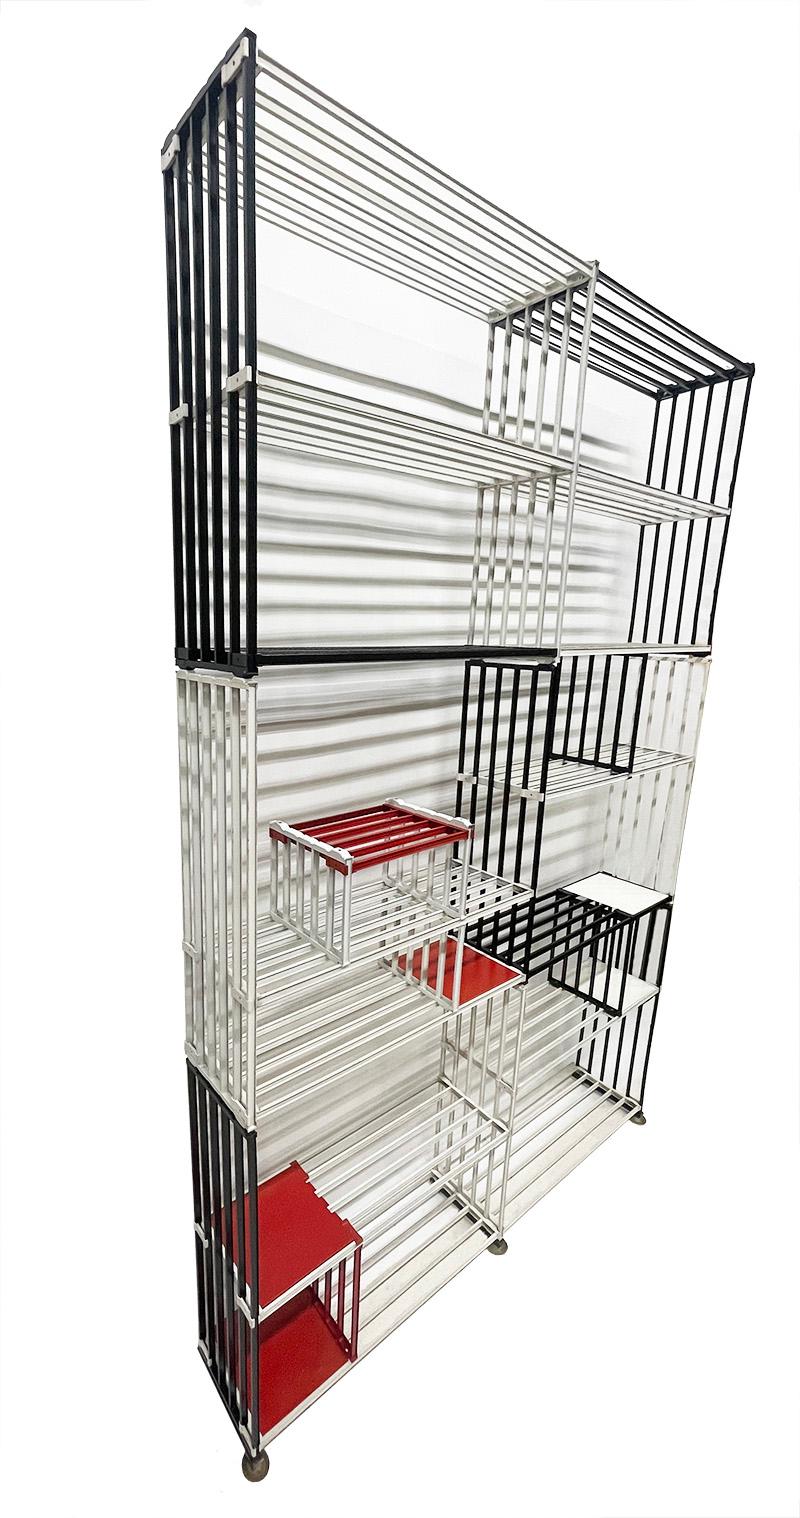 Modular wall bookcase by Tjerk Reijenga for Pilastro, ca 1960

A metal bookcase that can be arranged to taste with the division or width. The bookcase is assembled with uprights and shelves and attached with nuts and bolts. (some new) The uprights